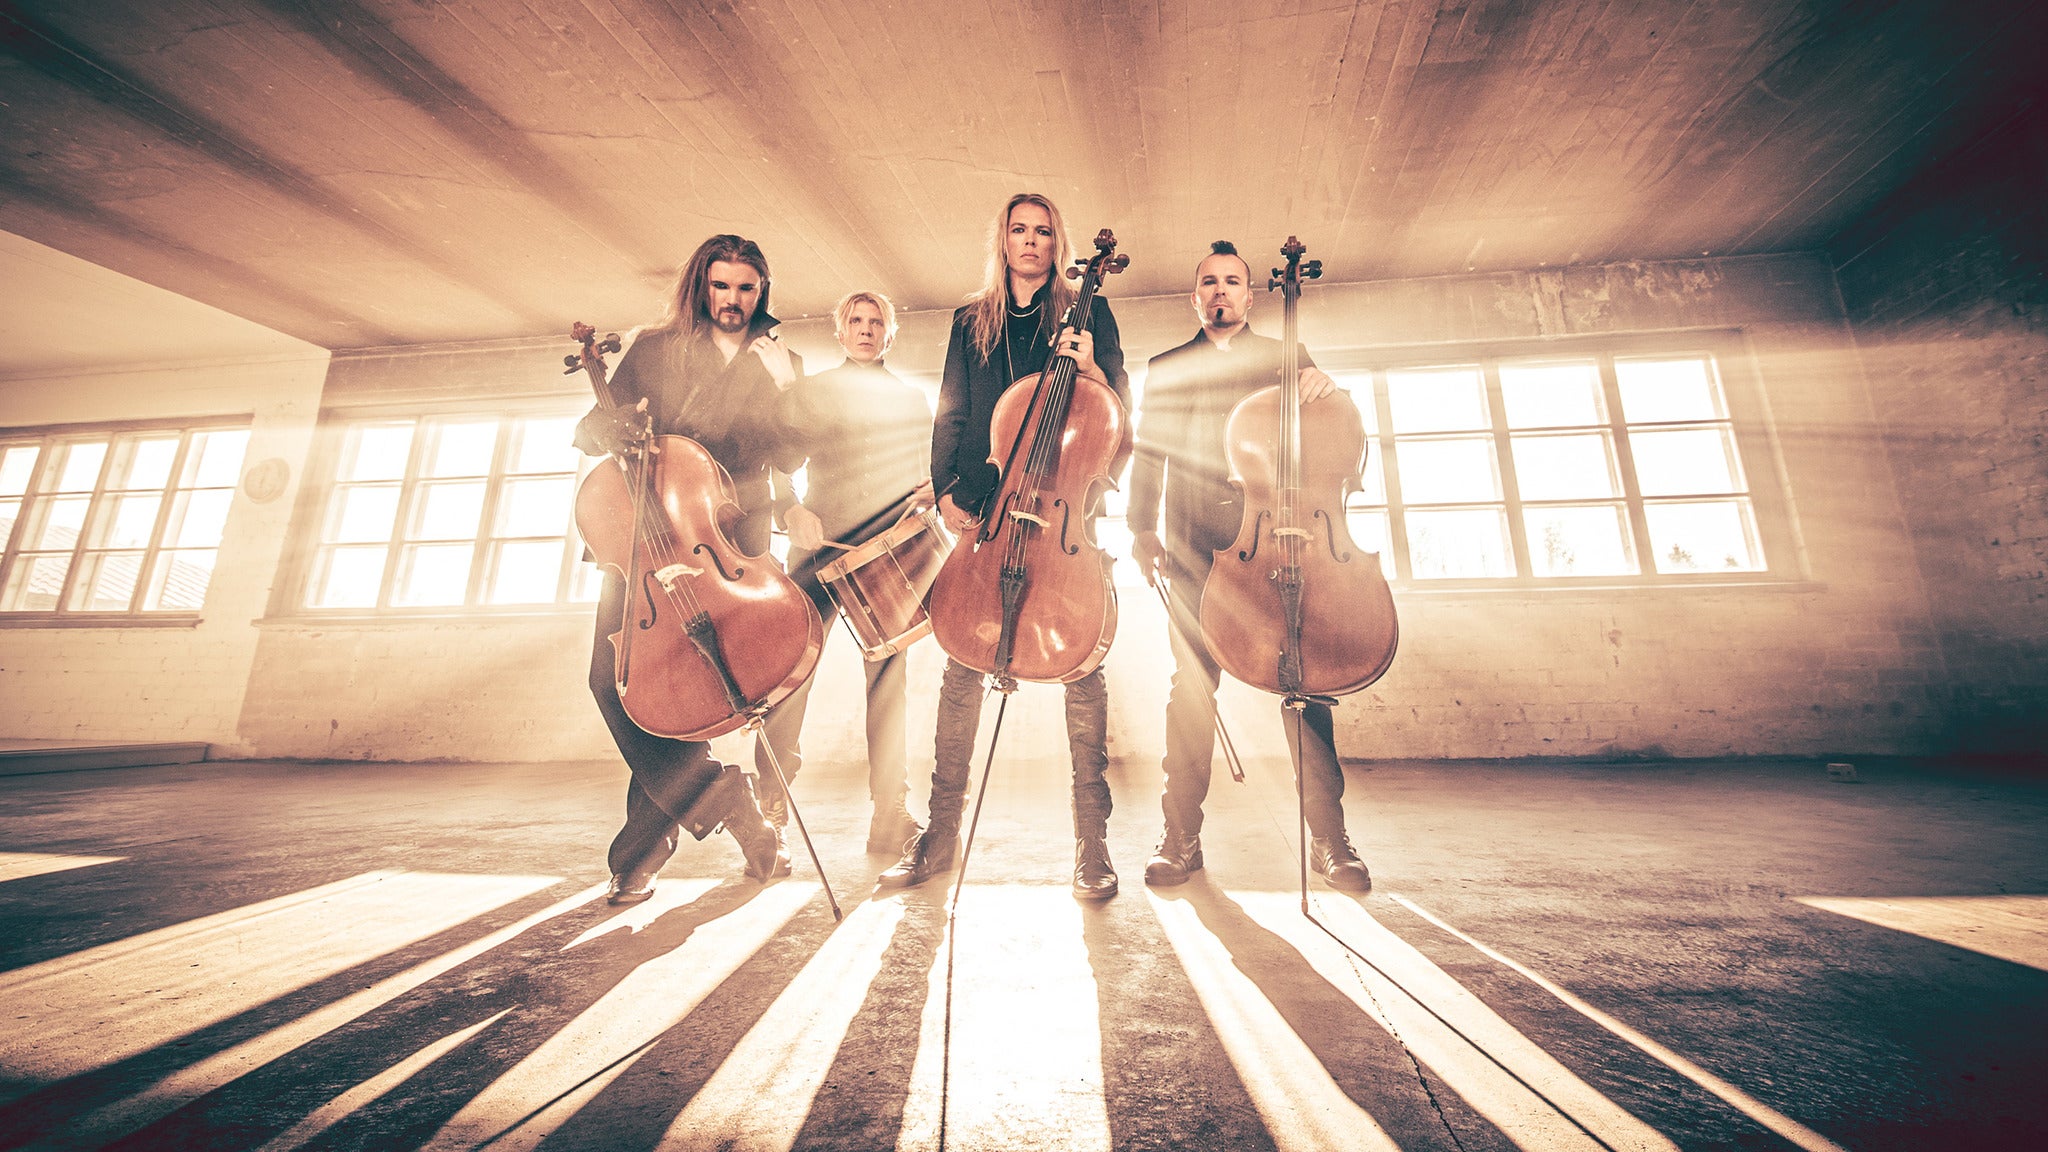 Apocalyptica - Cell-0 Tour at State Theatre